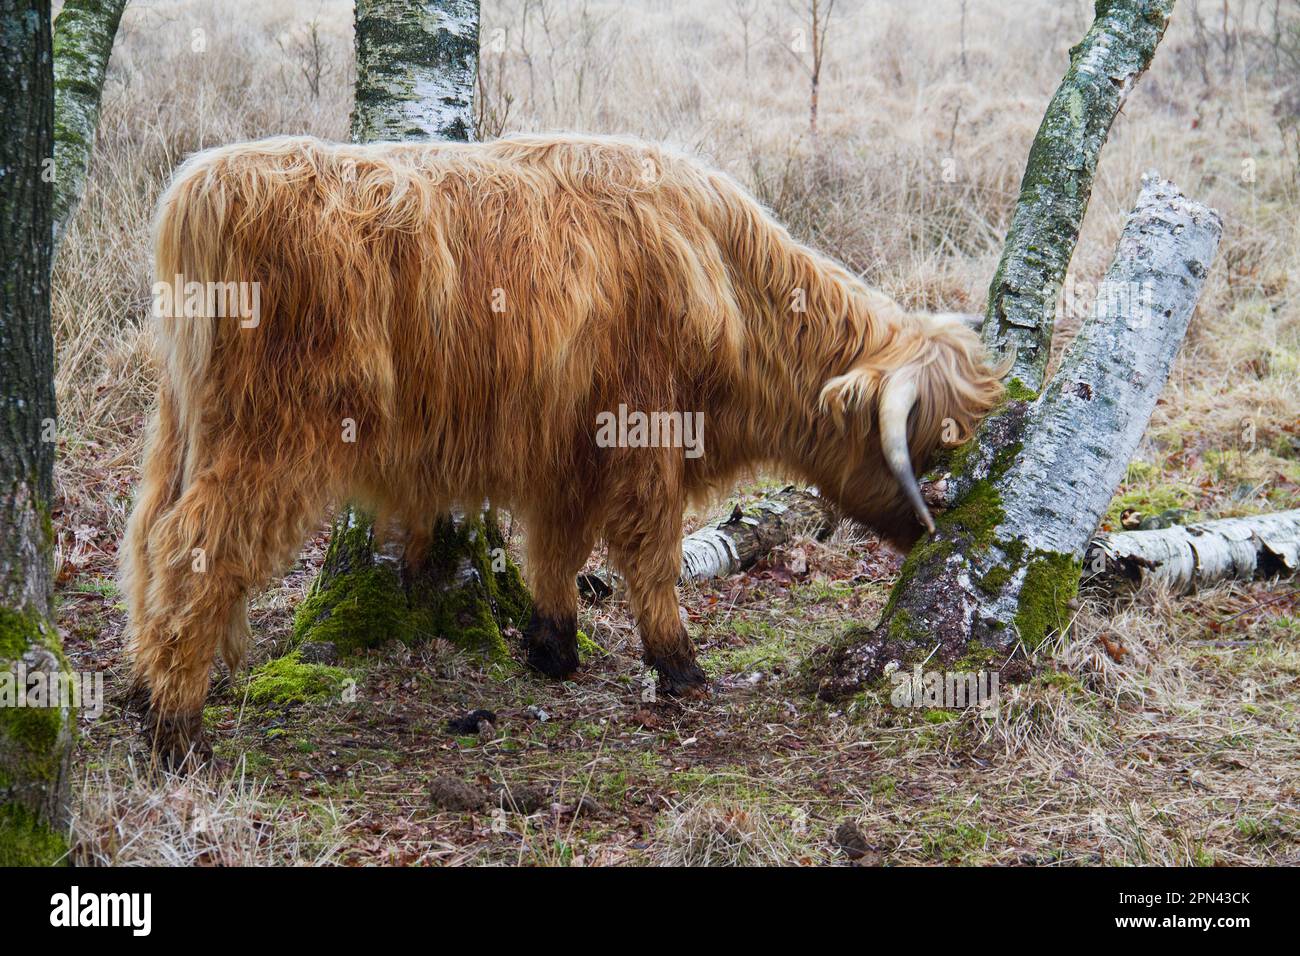 Scottish highland cow with long red hair and long horns rubs his head against a tree Stock Photo